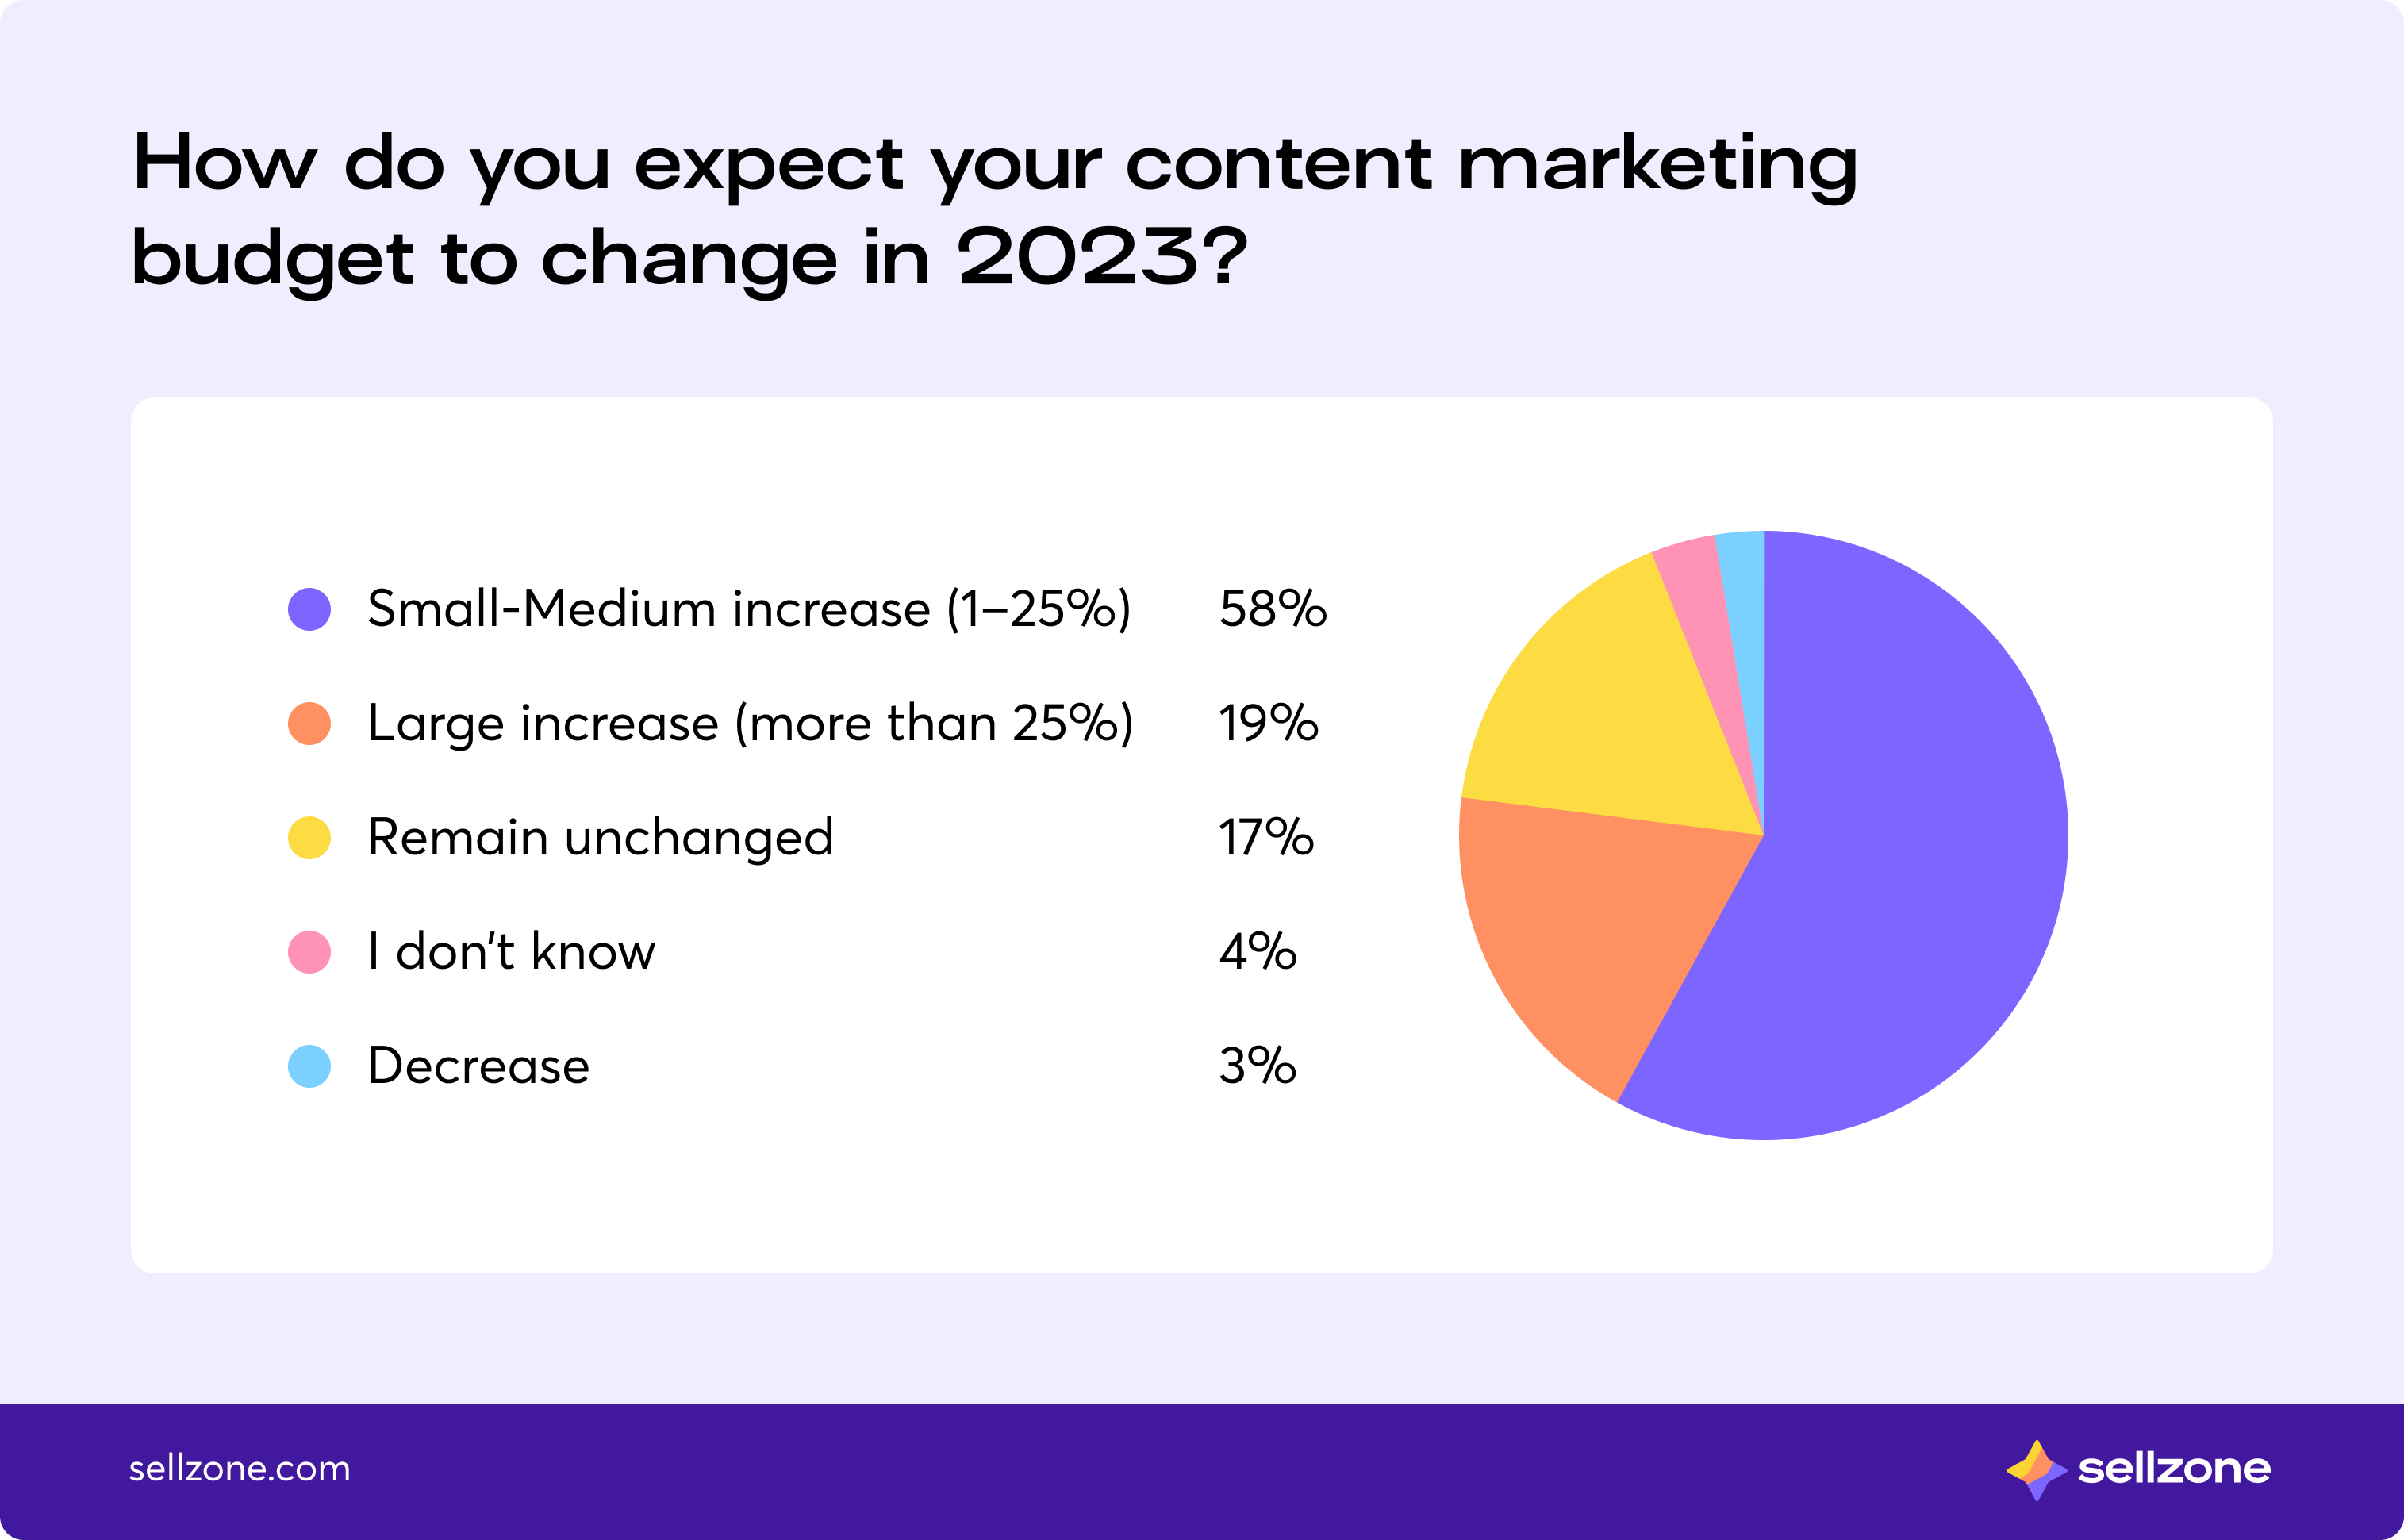 Content marketing budget changes in 2023 